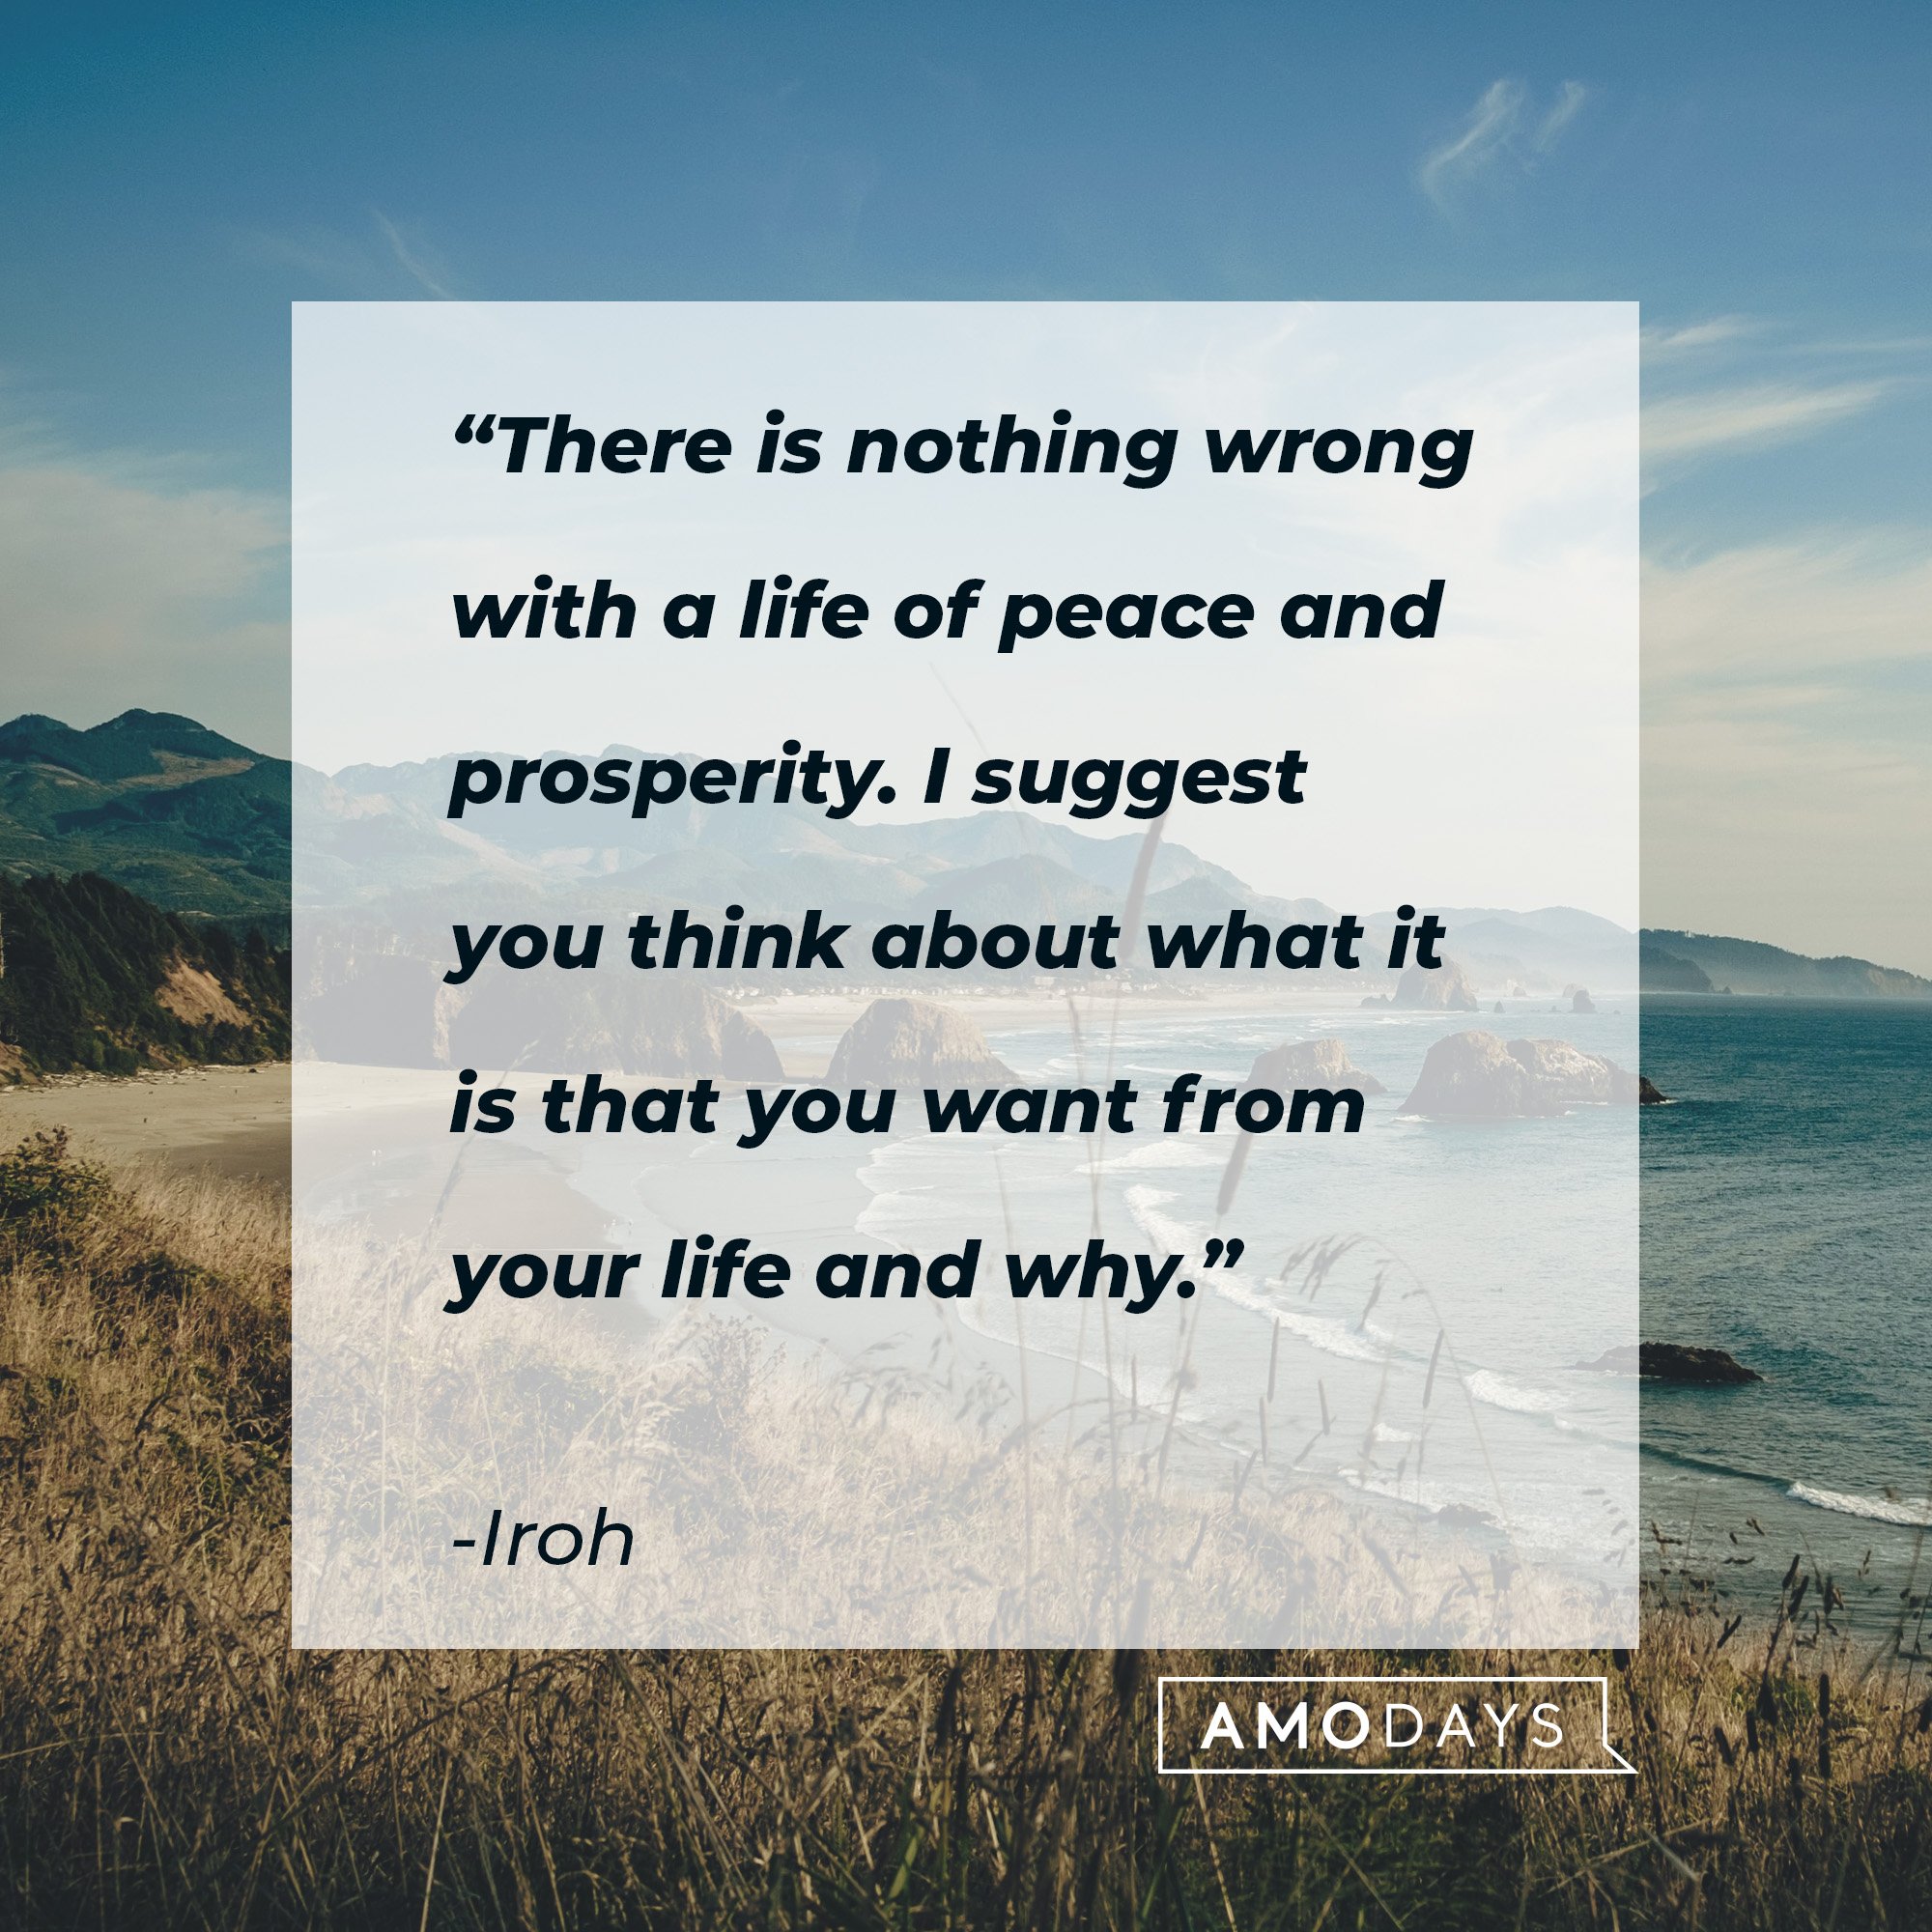 Iroh's quote: “There is nothing wrong with a life of peace and prosperity. I suggest you think about what it is that you want from your life and why.” | Image: AmoDays